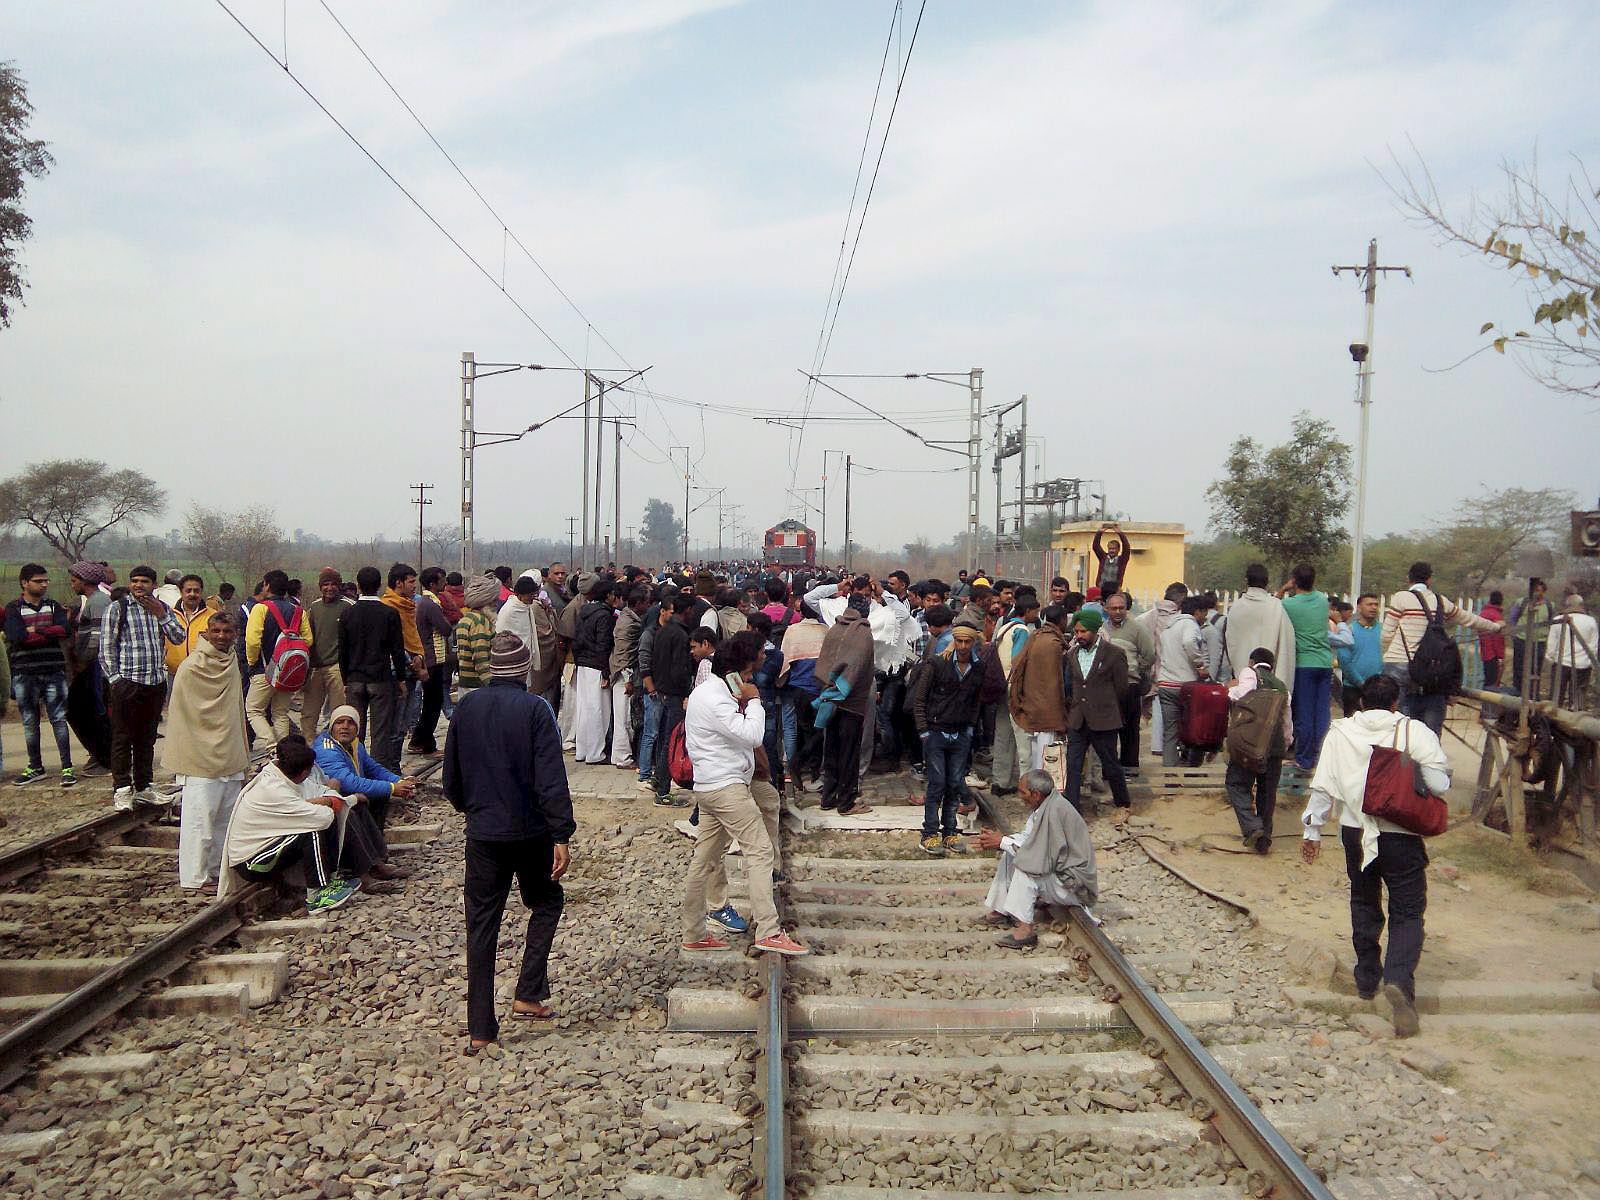 Jat community members block the railway tracks during their agitation for reservation near Rohtak. - PTI Photo